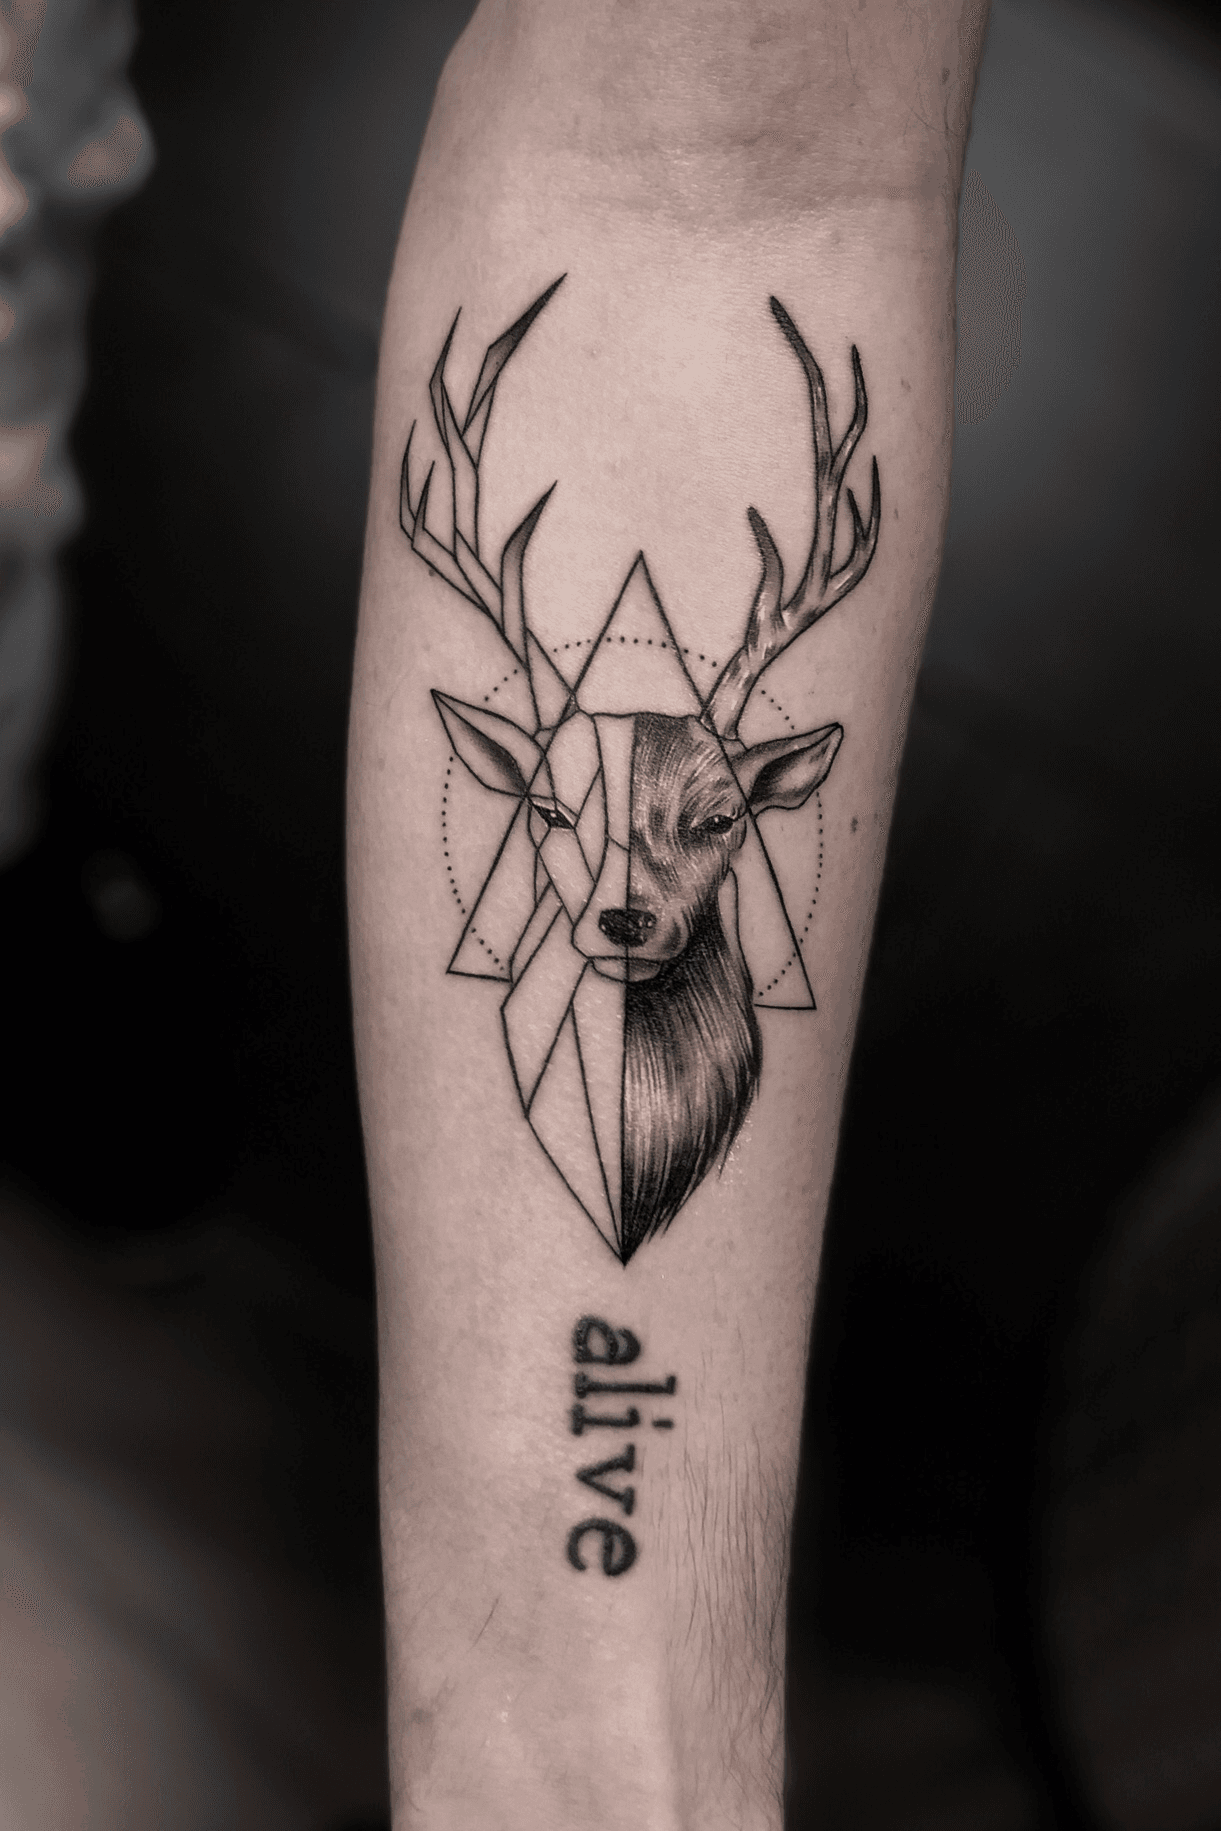 25 Most Popular Deer Tattoo Ideas Designs and Meaning 2022